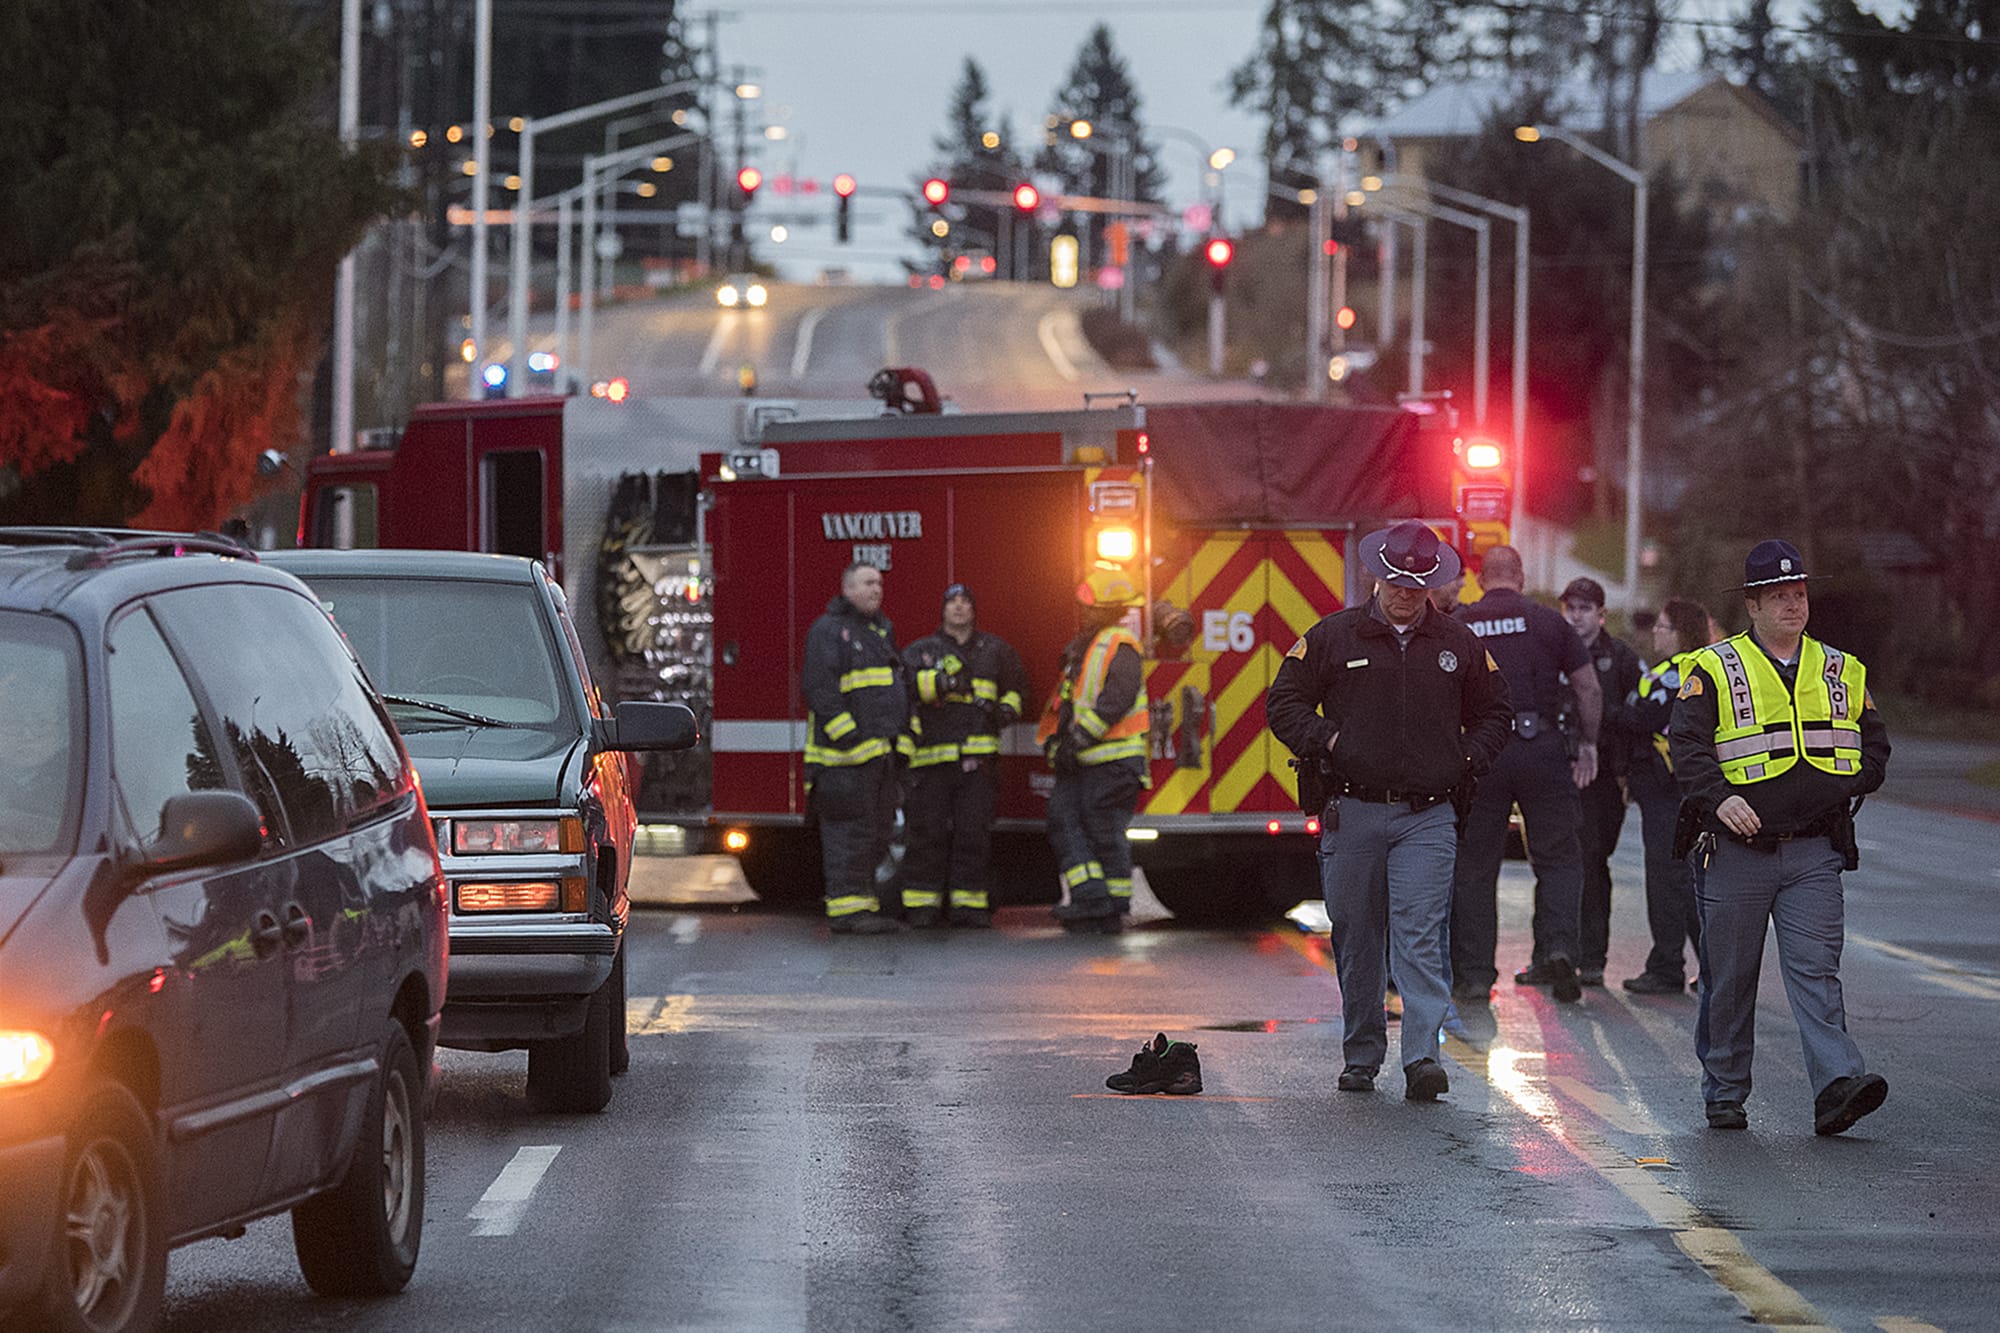 Police investigate the scene after two pedestrians were struck and killed in east Vancouver on Tuesday morning, Jan. 21, 2020.